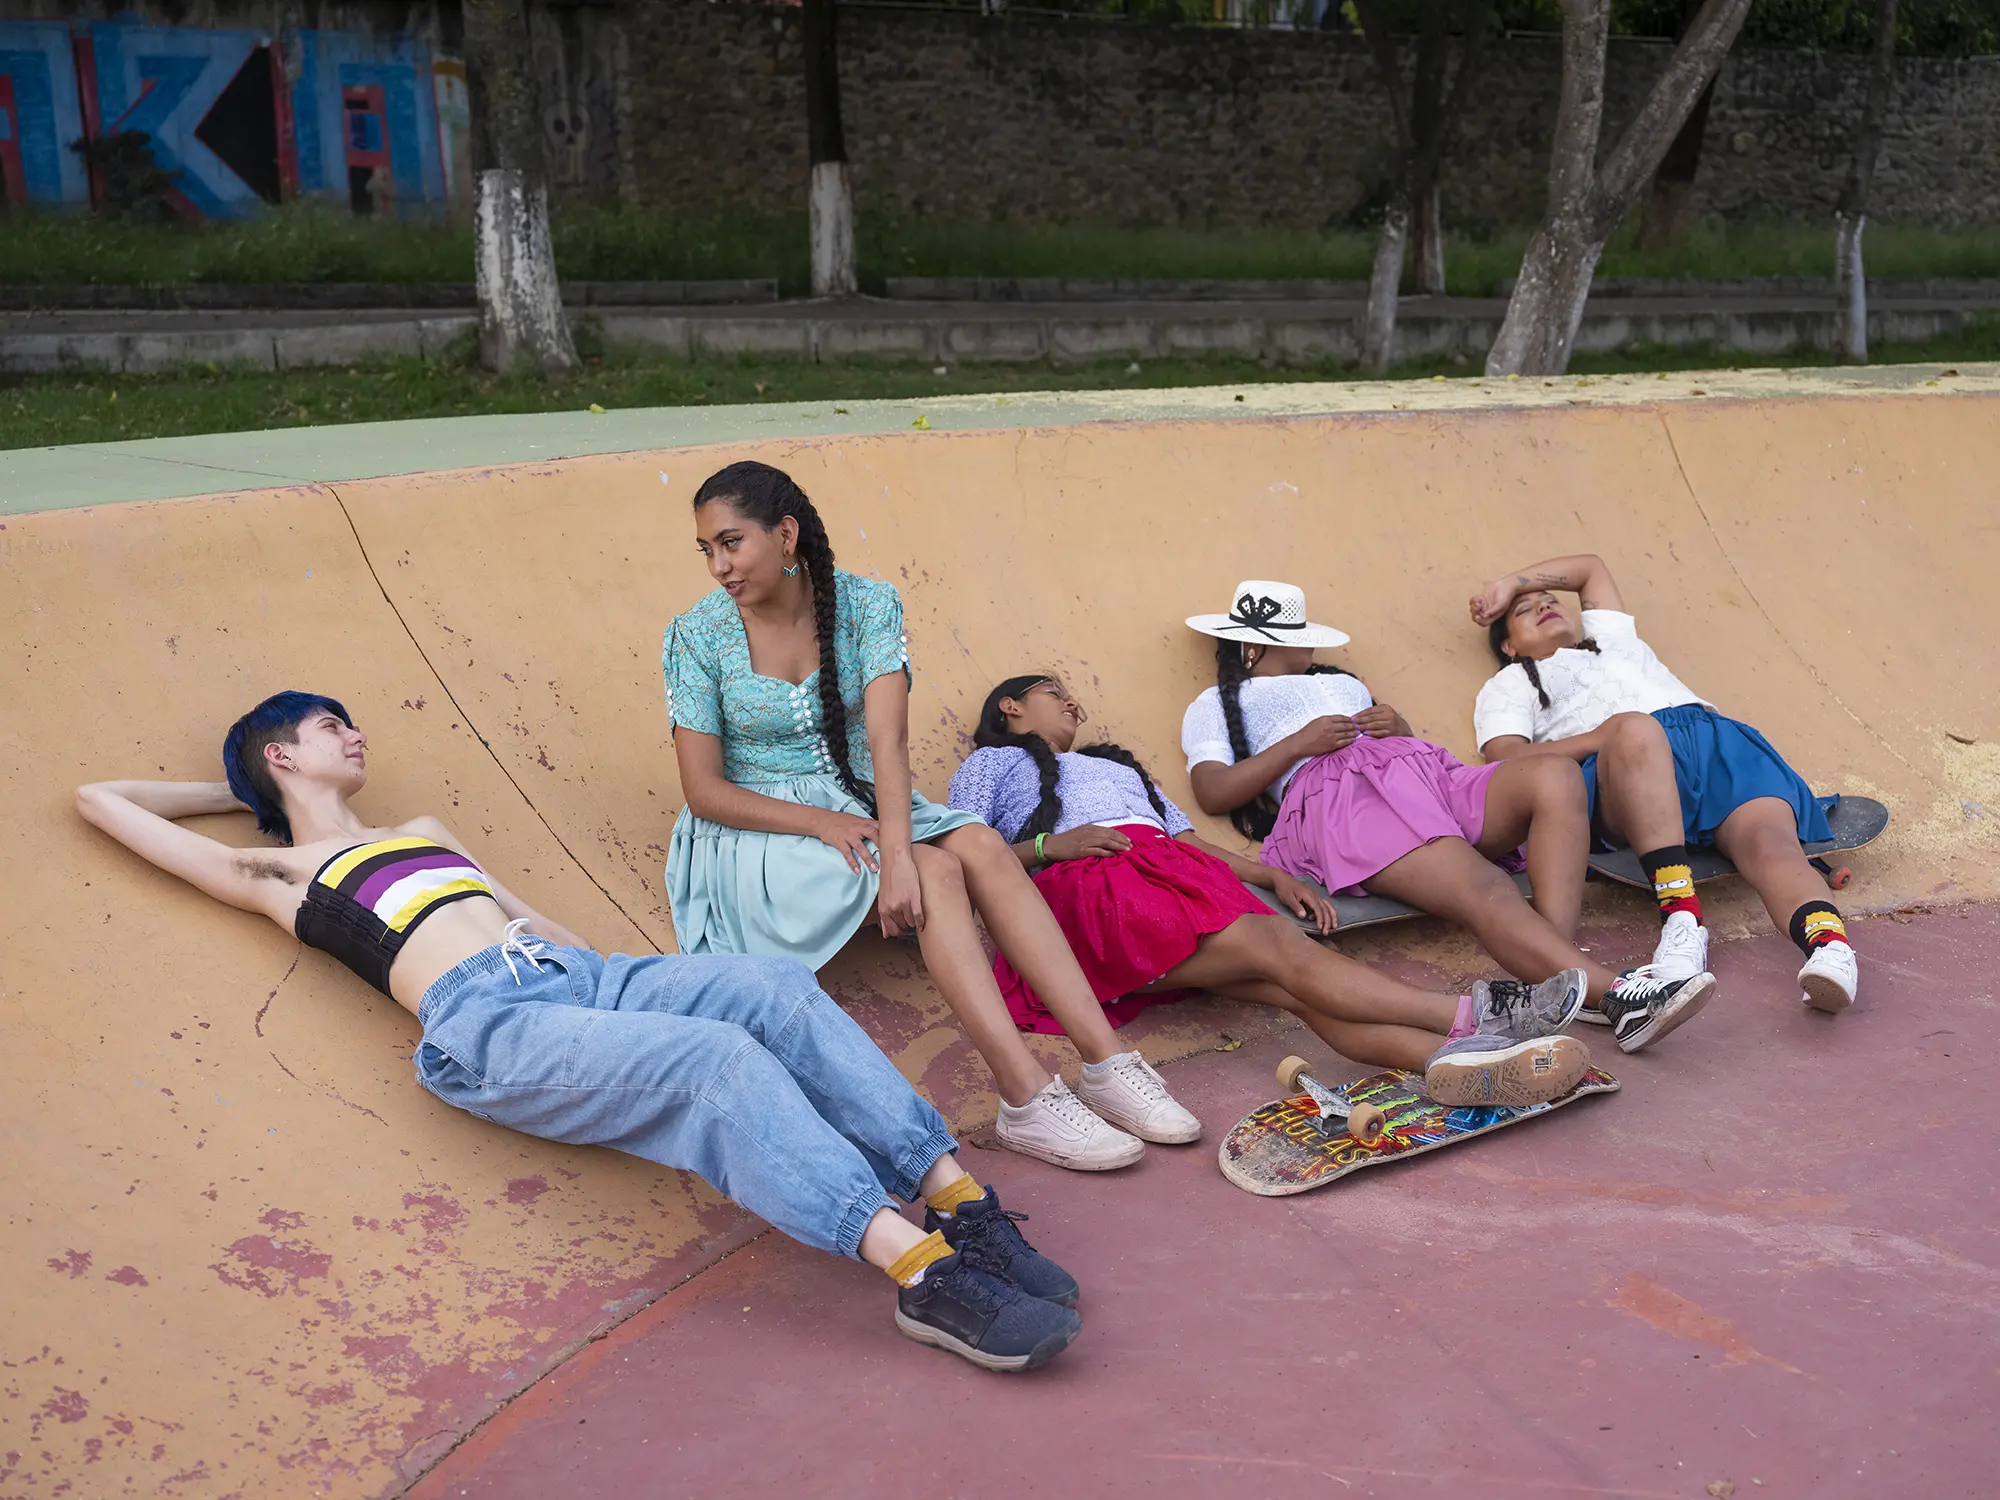 Tam lays in a skate park with young women